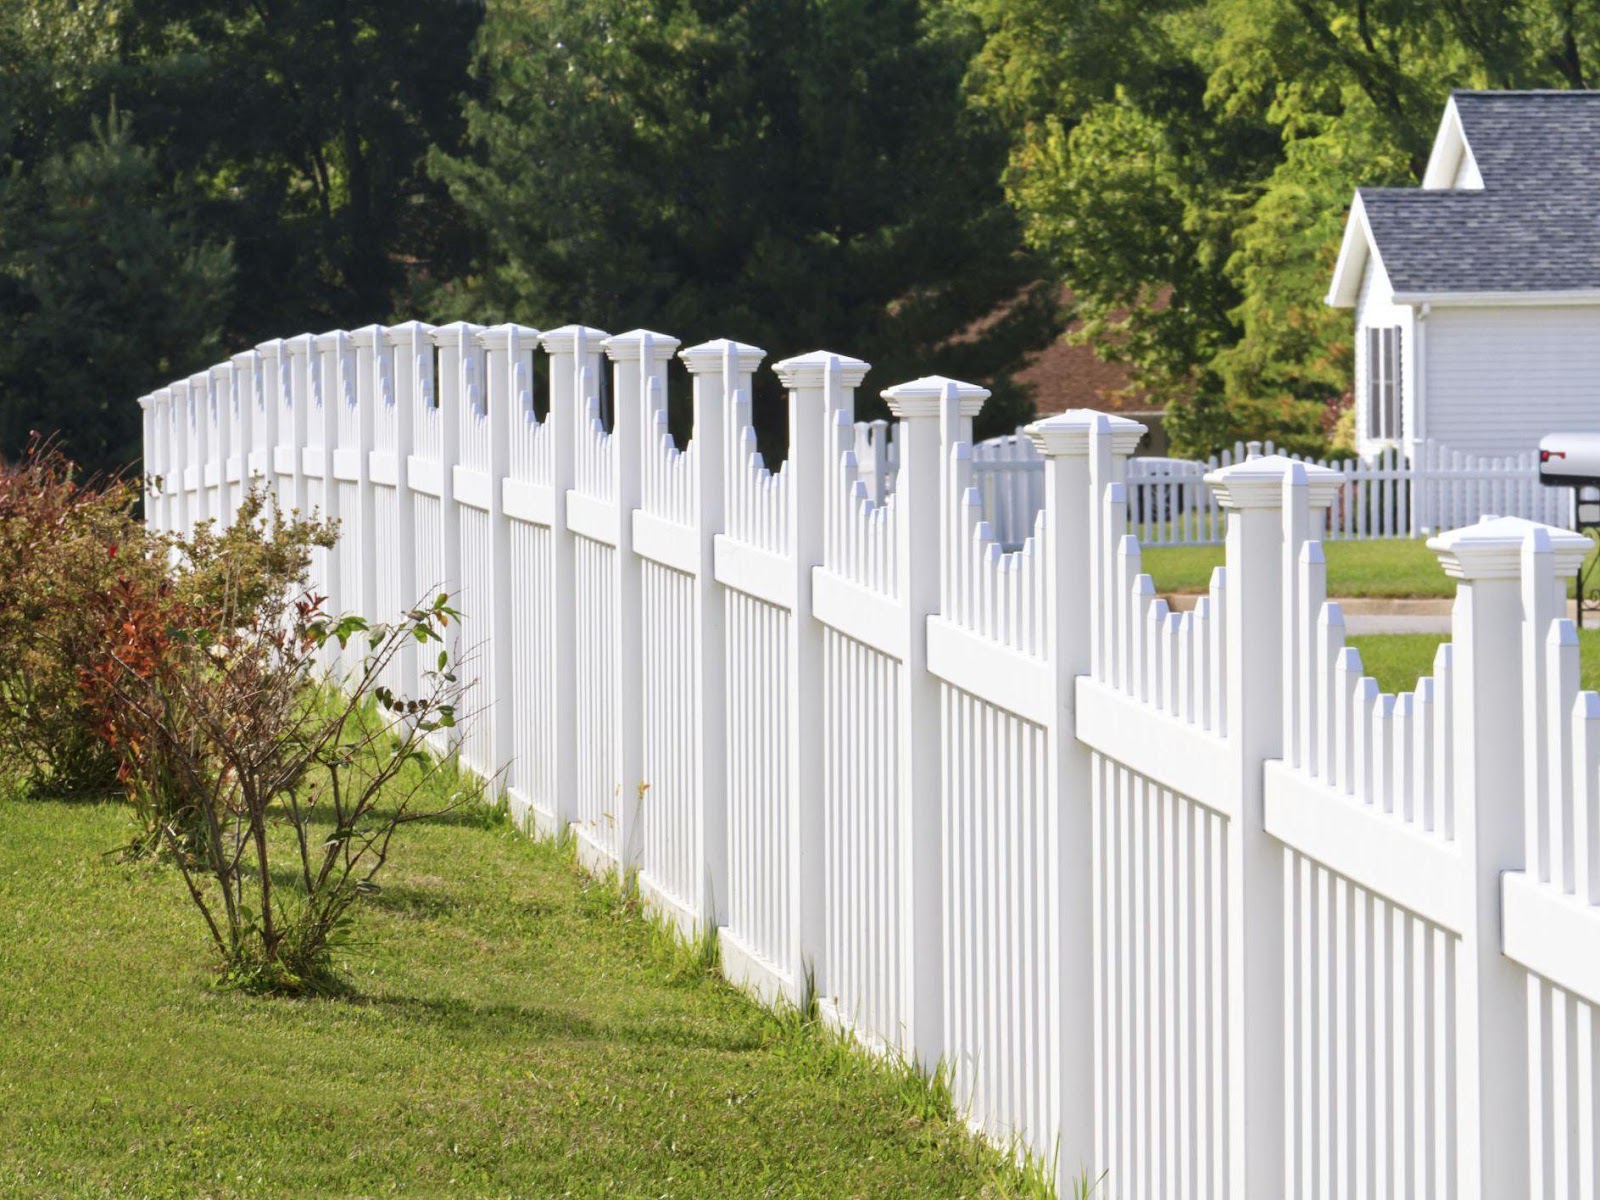 Tips for Hiring a Local Fence Company